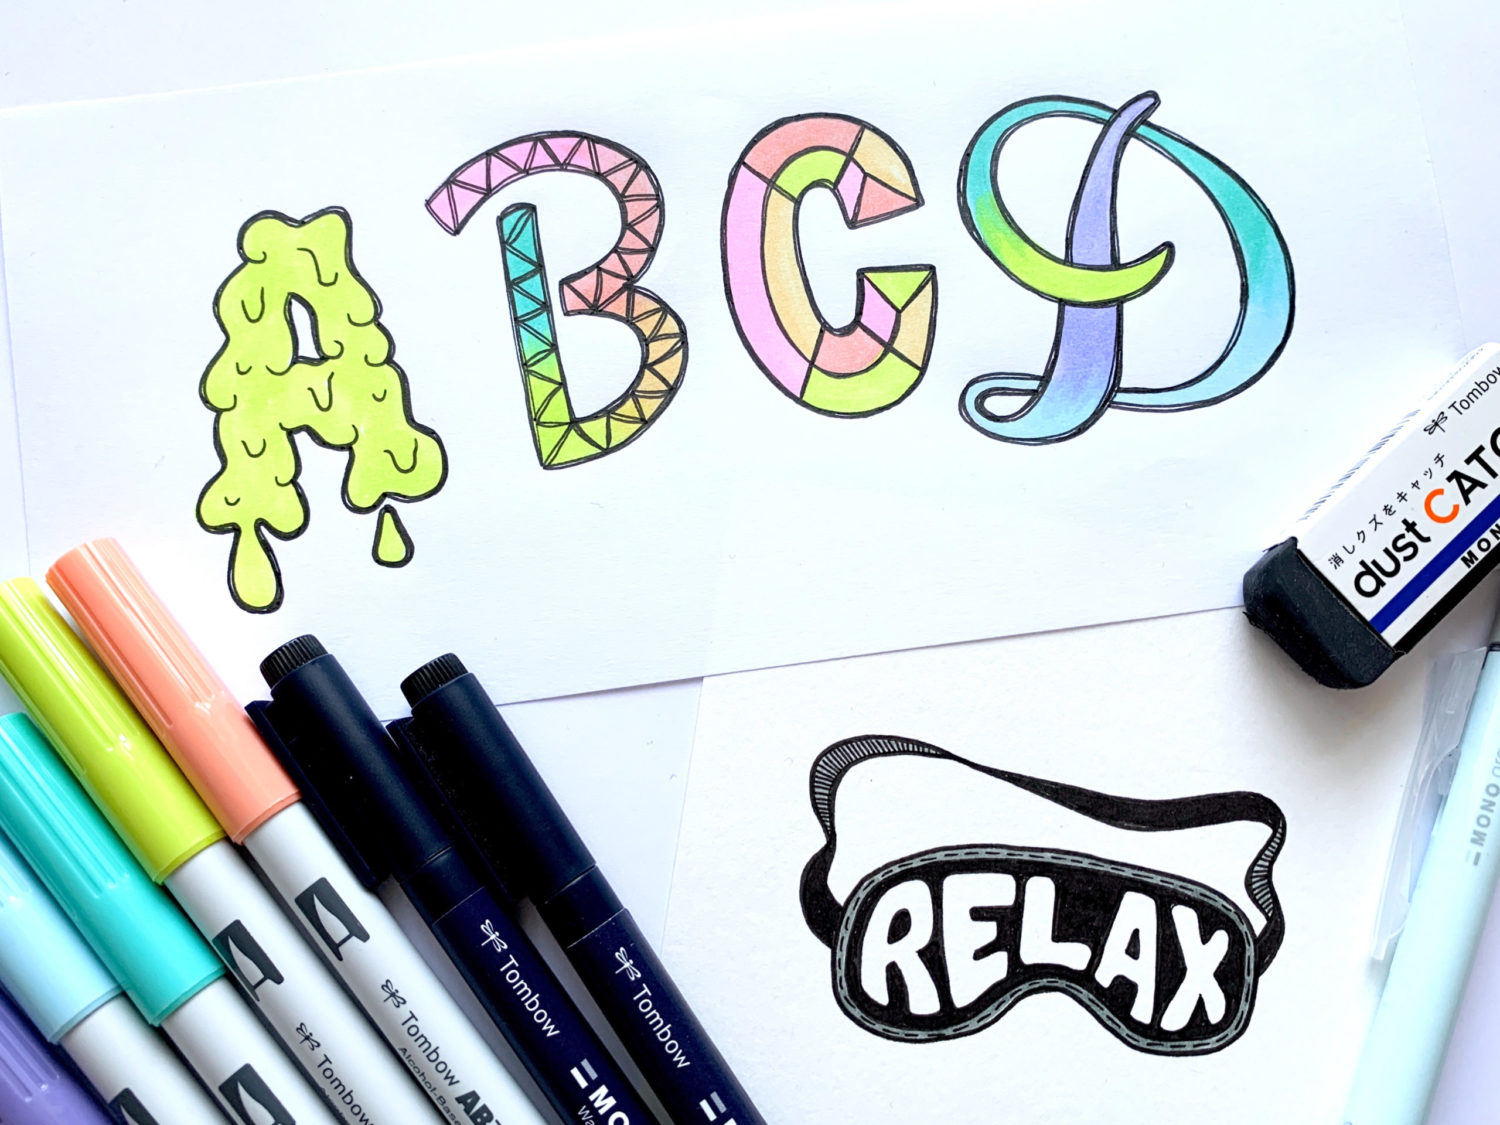 Learn how to create block lettering using small brush pens – Vial Designs